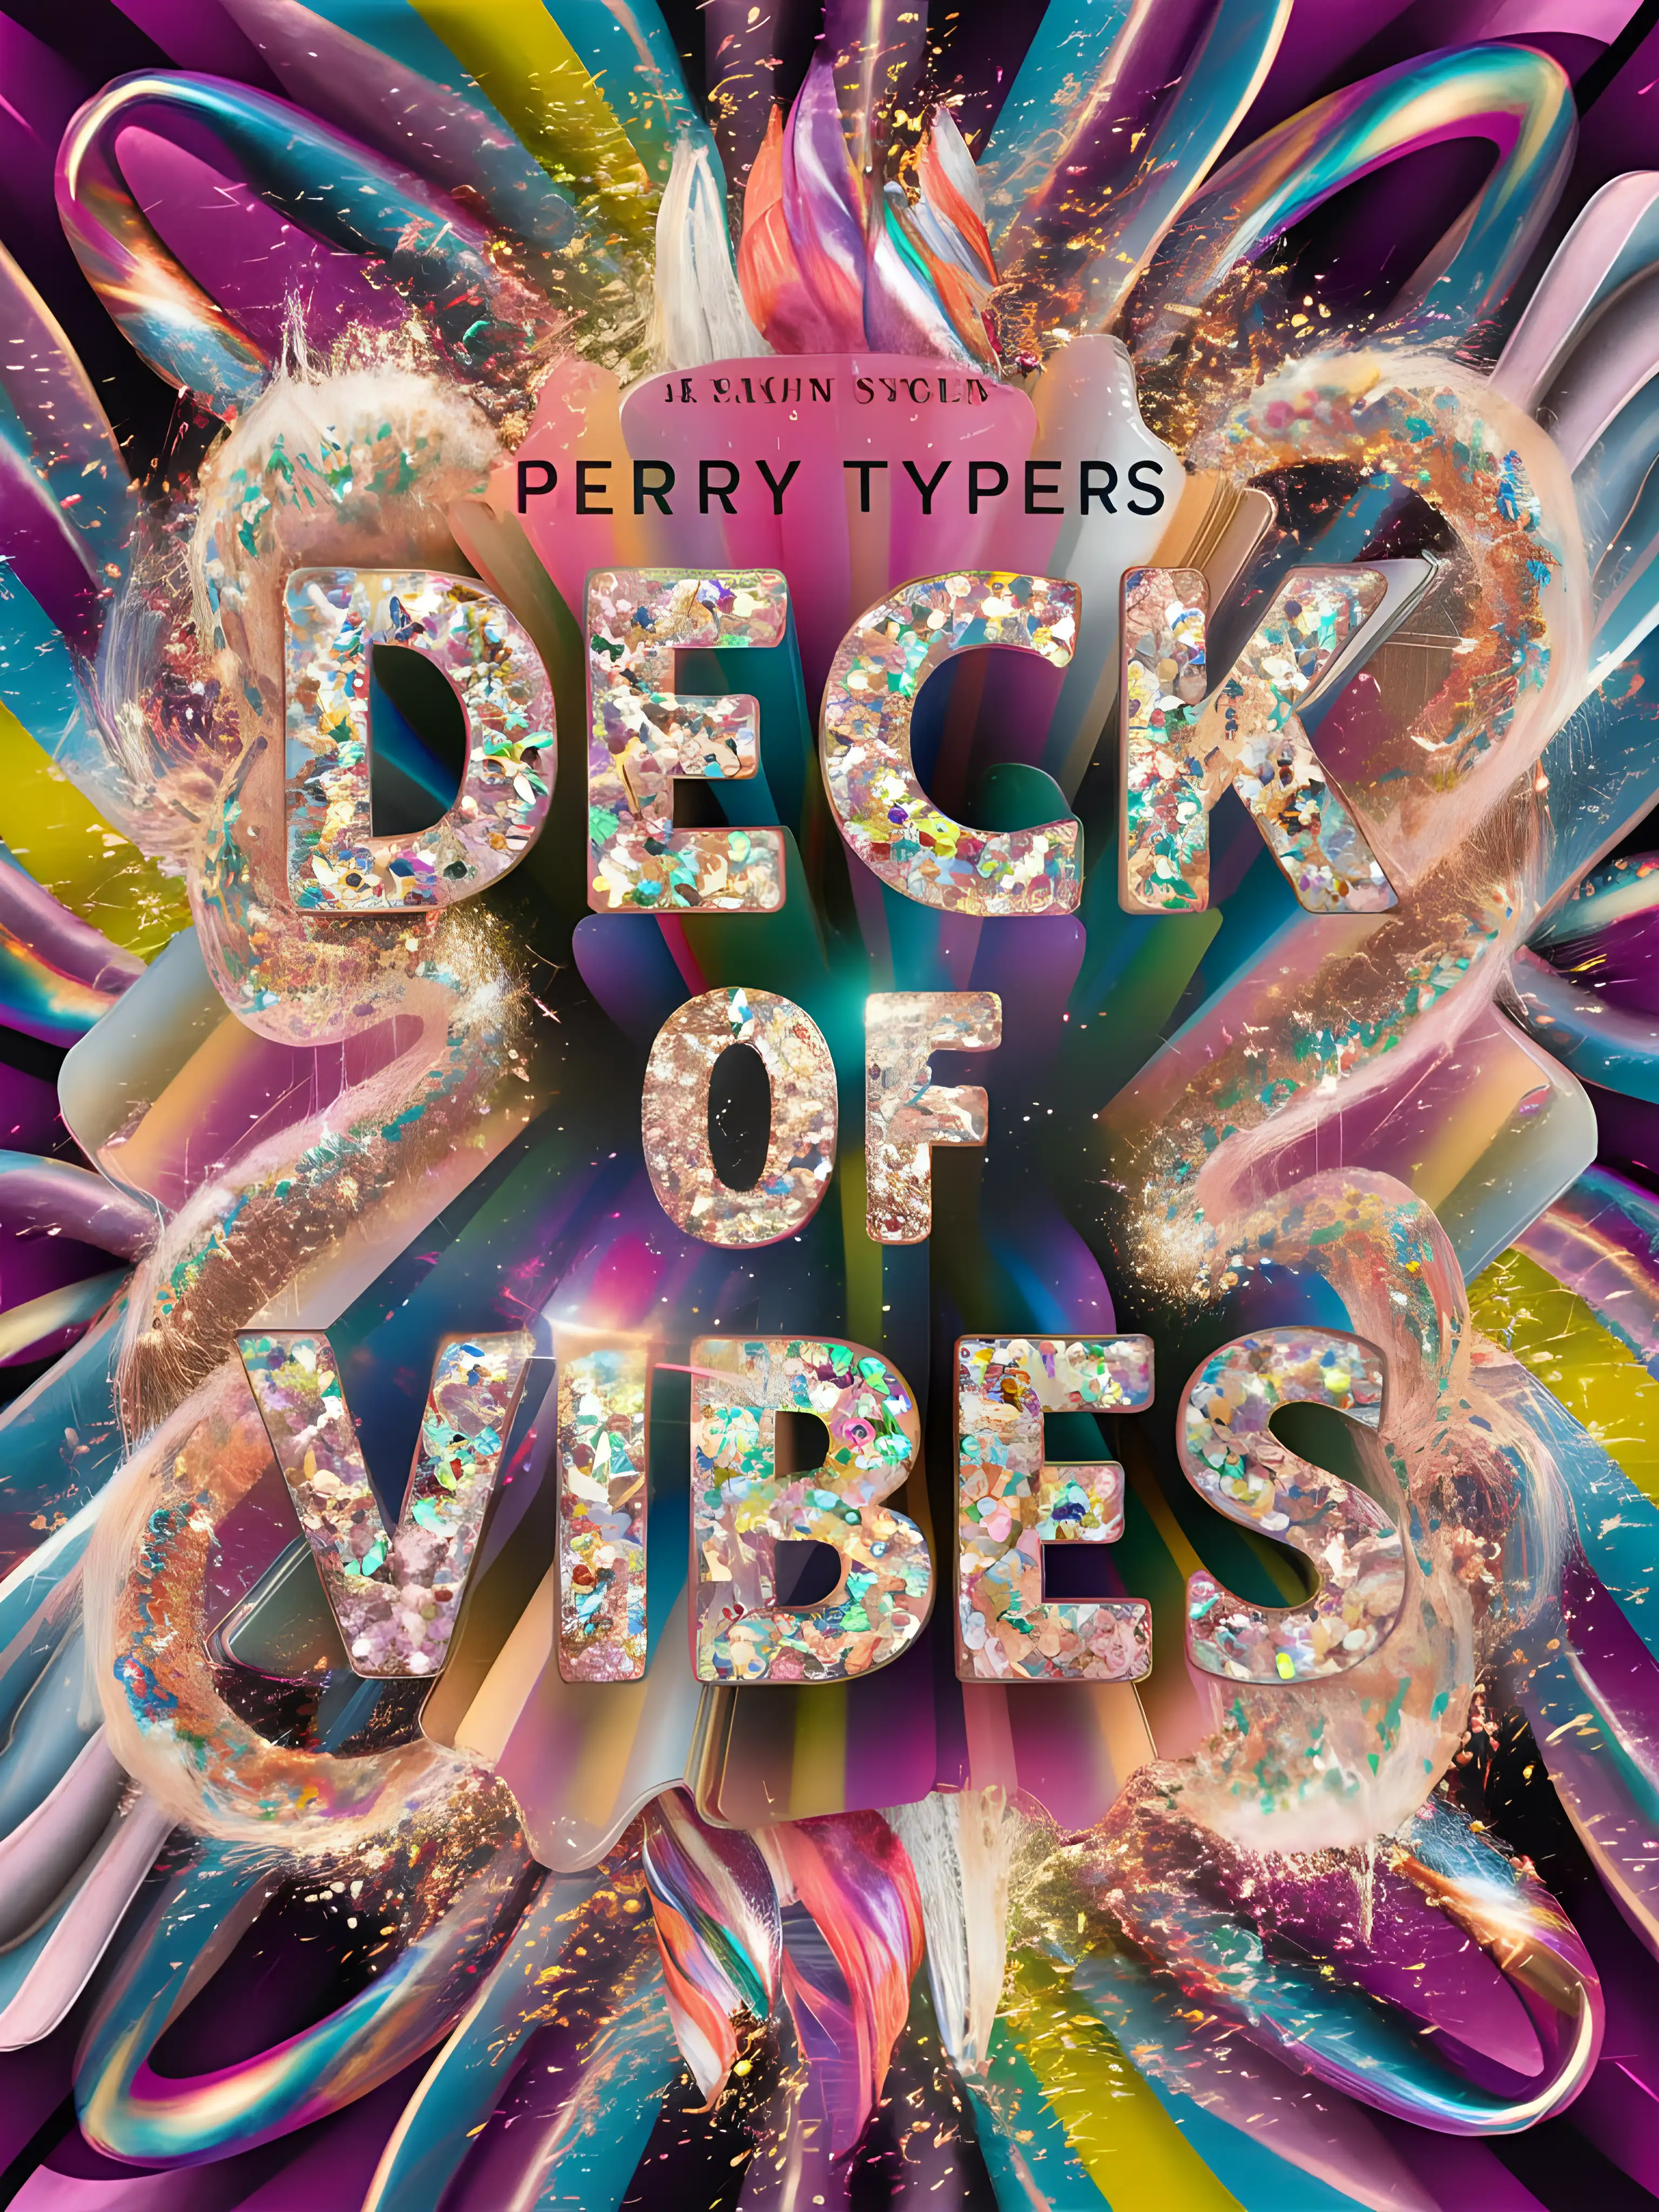 Rainbow Glitter and Iridescent Powder Swirling Perry Typers Deck of Vibes